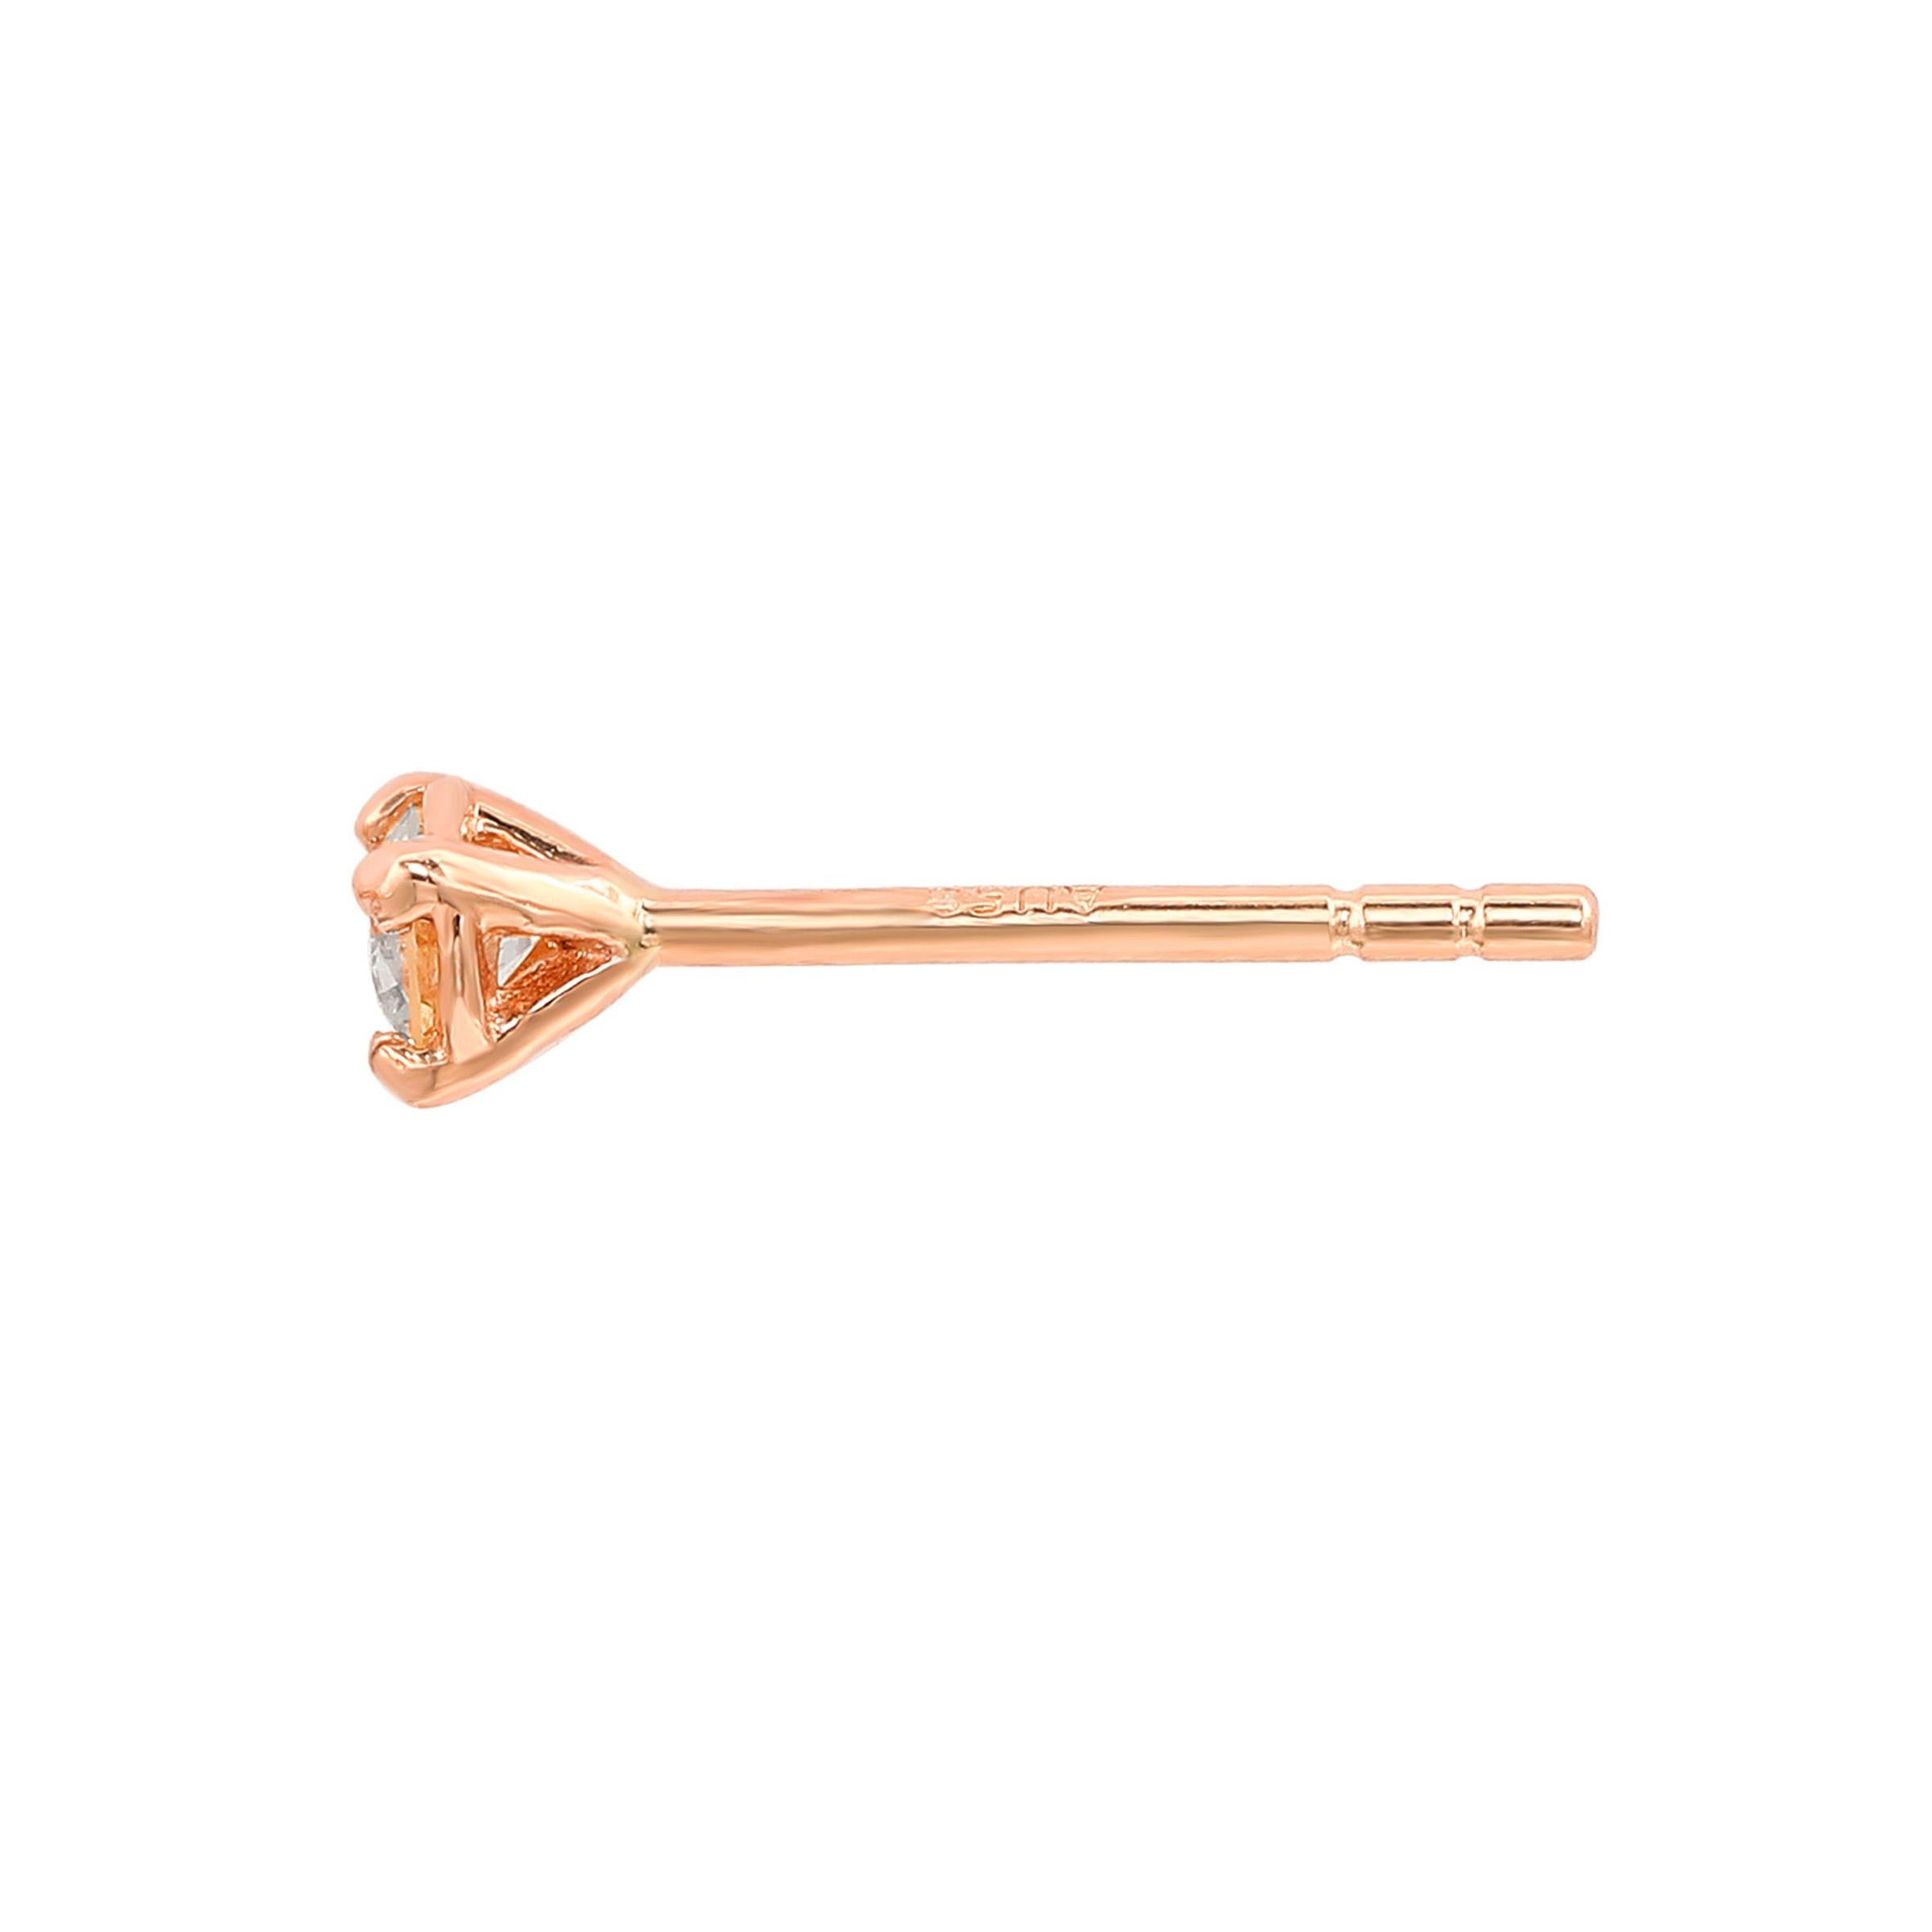 Perfect as a second or third piercing. Add an elegant accent to your outfit with this sparkling stud earring featuring one gorgeous white diamond in a prong setting. Crafted in 14-karat rose gold, this earring has a high polish finish and butterfly